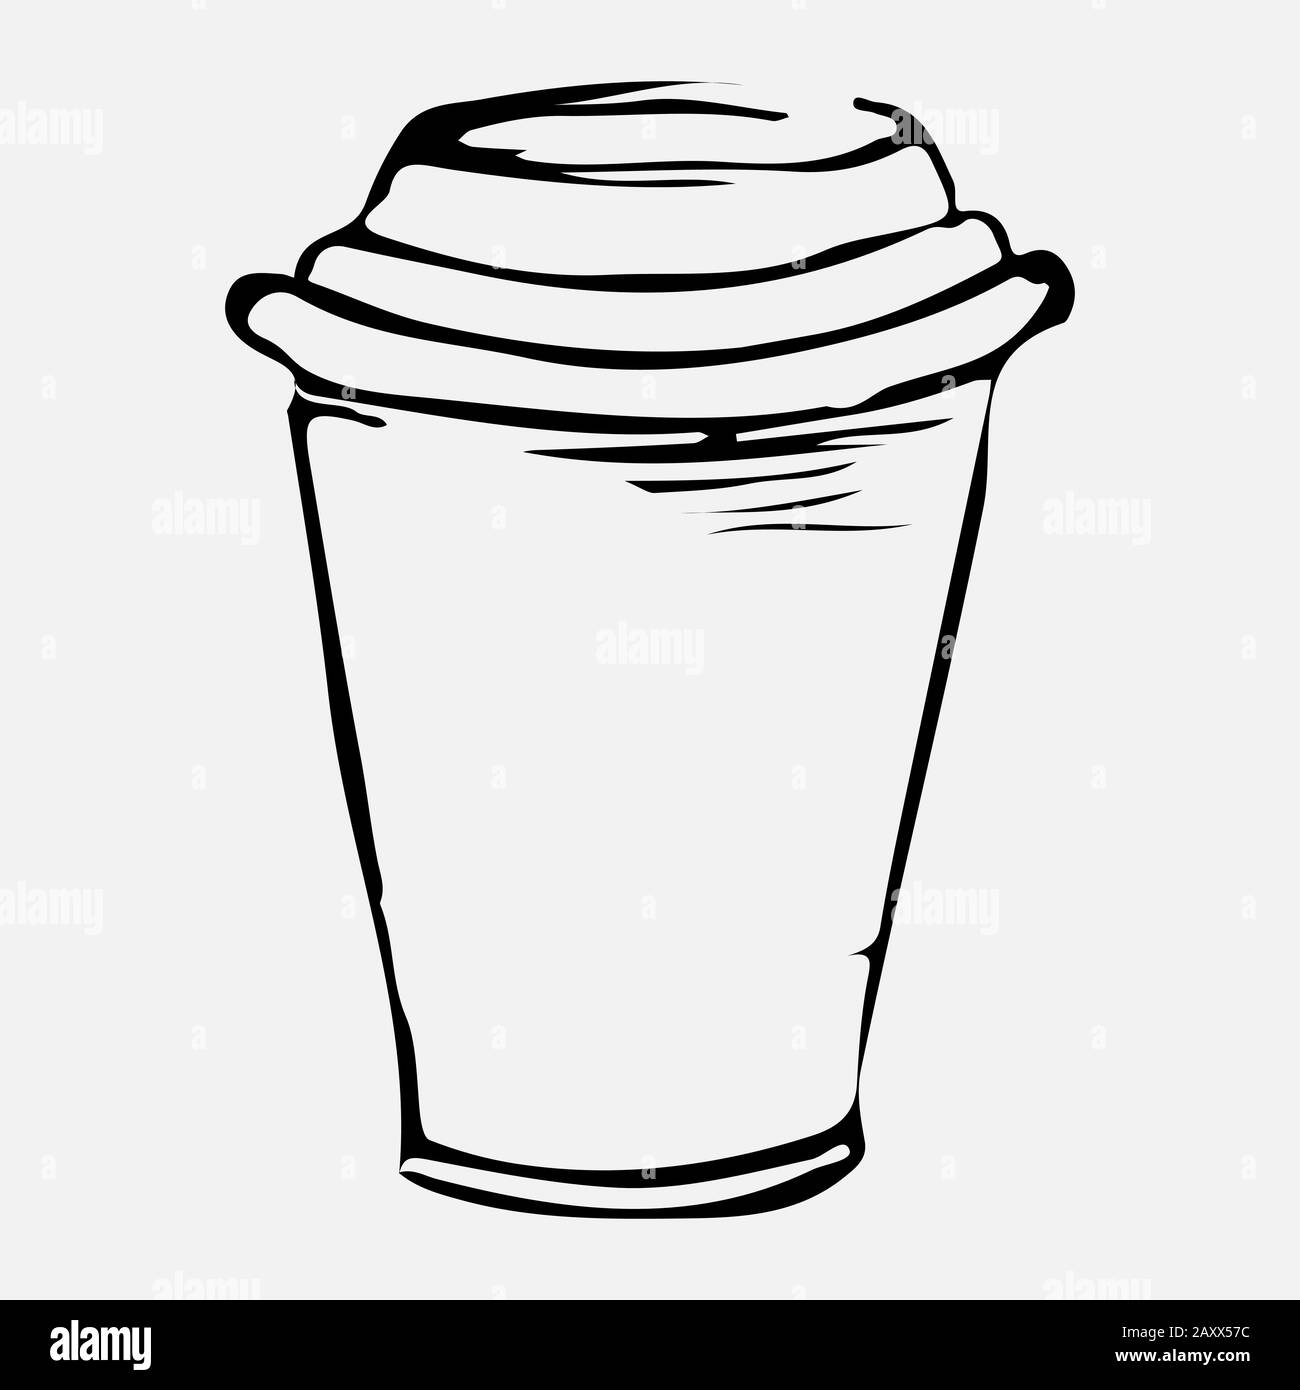 A mug of tea drawn by hand with a pencil. Stock Vector